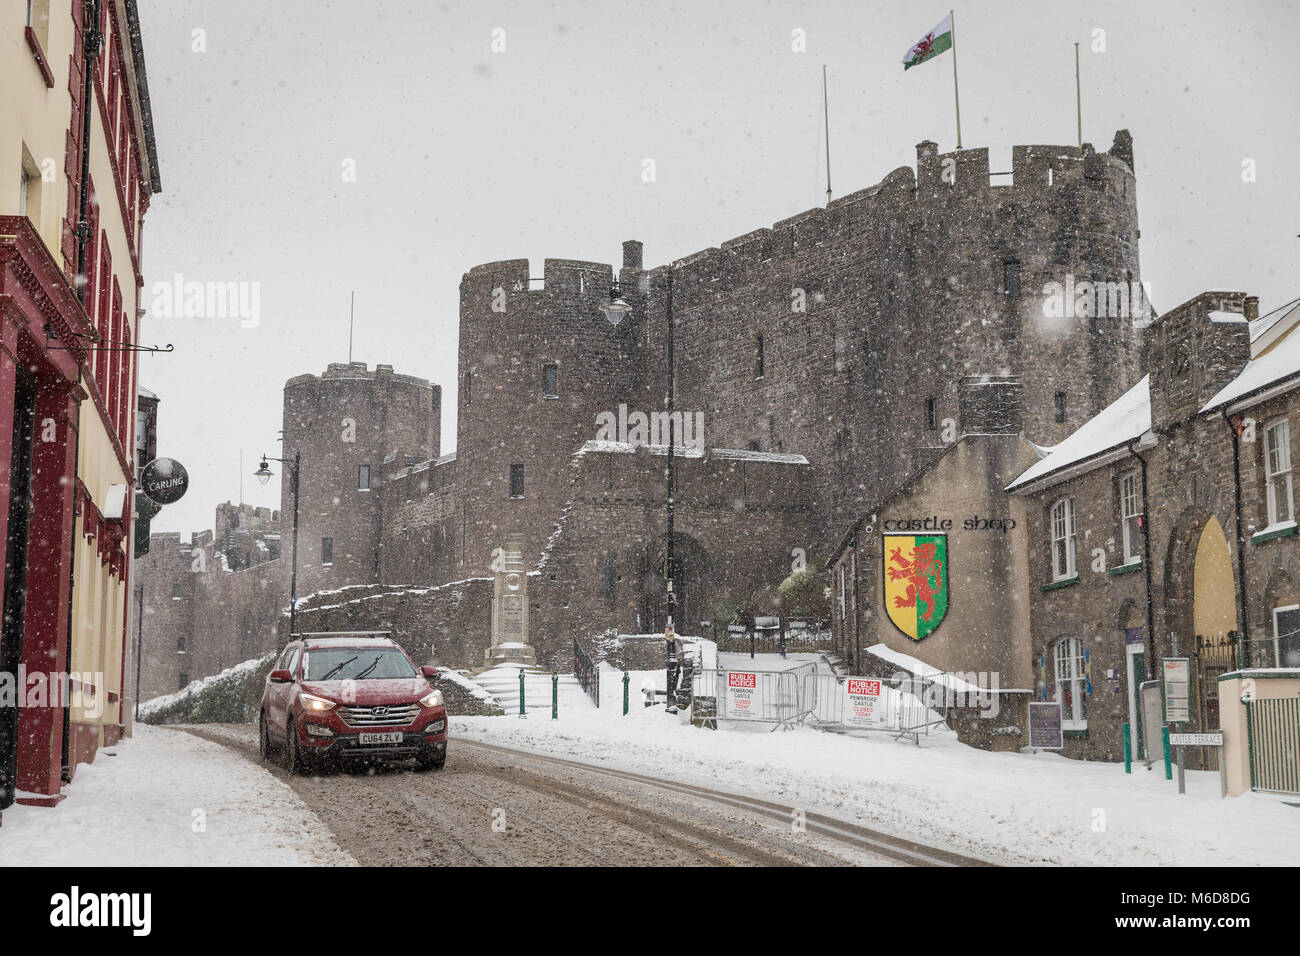 Pembrokeshire, Wales, 2nd March 2018. A rare snow filled scene at Pembroke Castle, Pembroke town in Pembrokeshire, Wales Credit: Drew Buckley/Alamy Live News Stock Photo